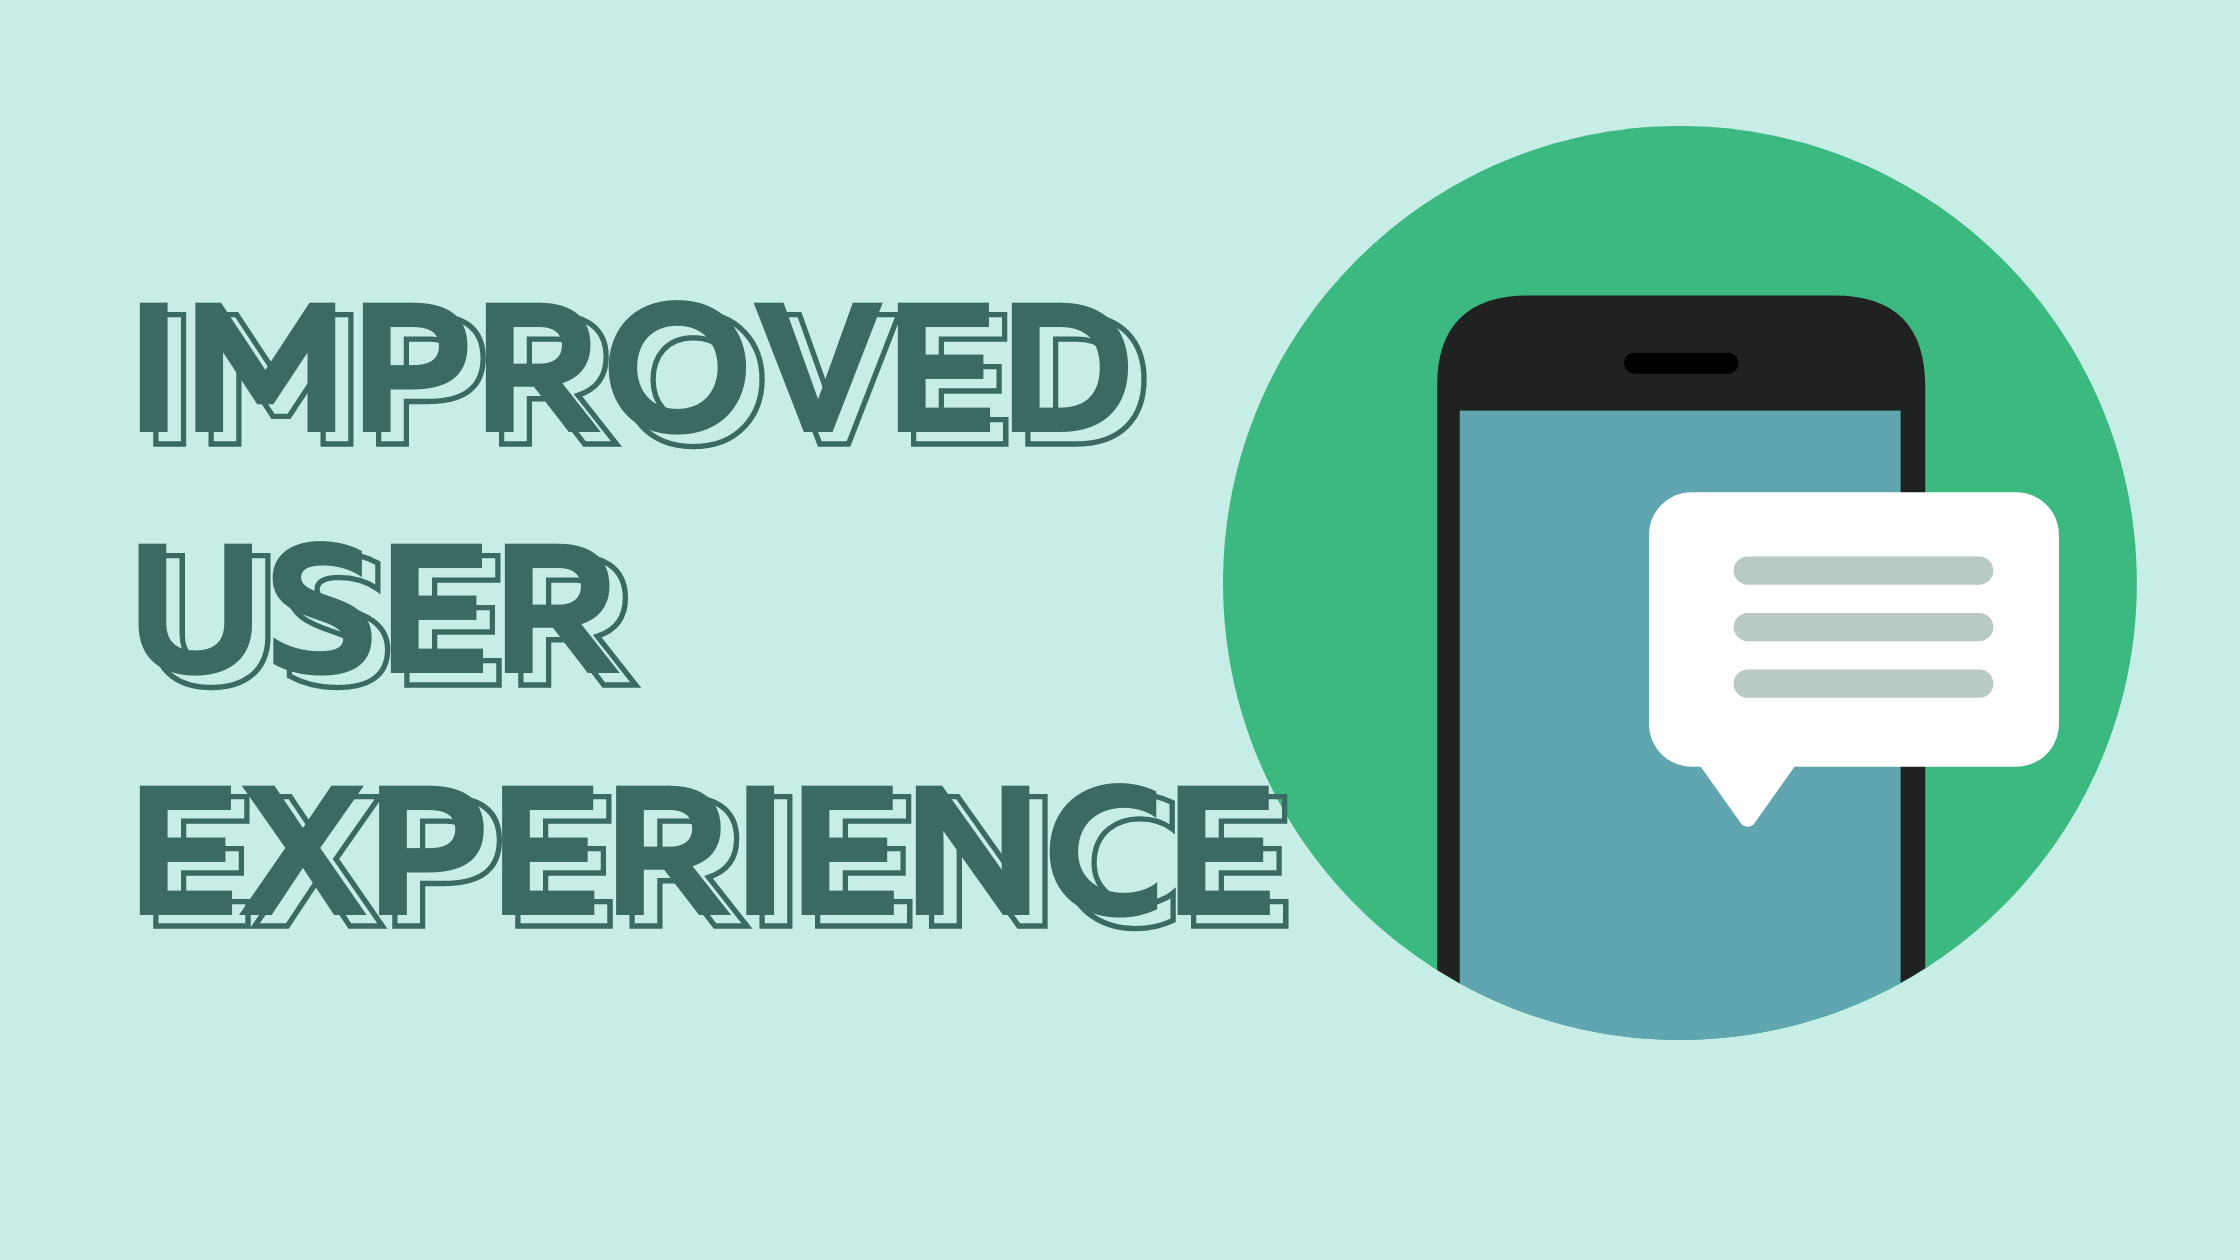 Headless Commerce benefits: Improved User Experience